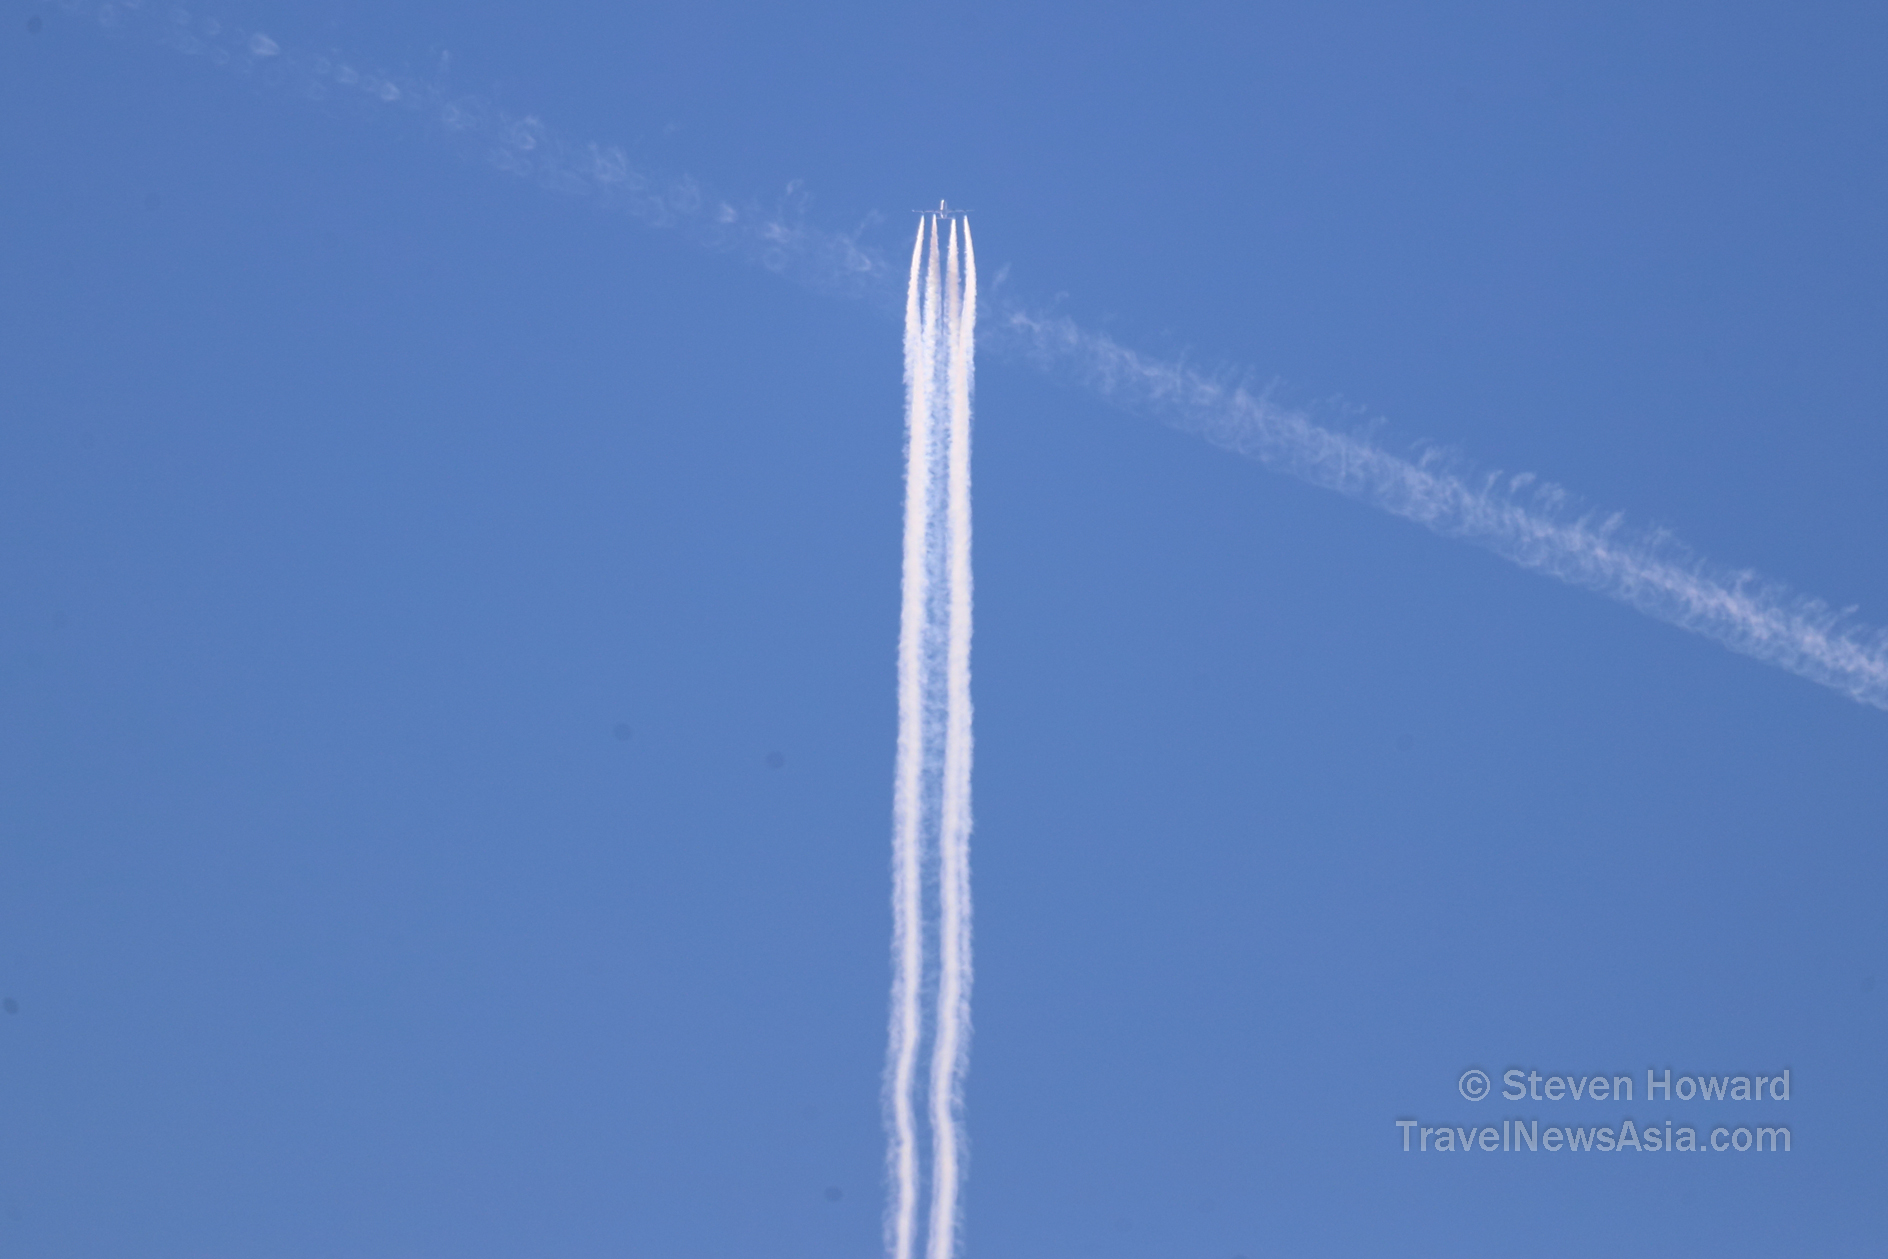 Aircraft flying high with contrails visible. Picture by Steven Howard of TravelNewsAsia.com Click to enlarge.